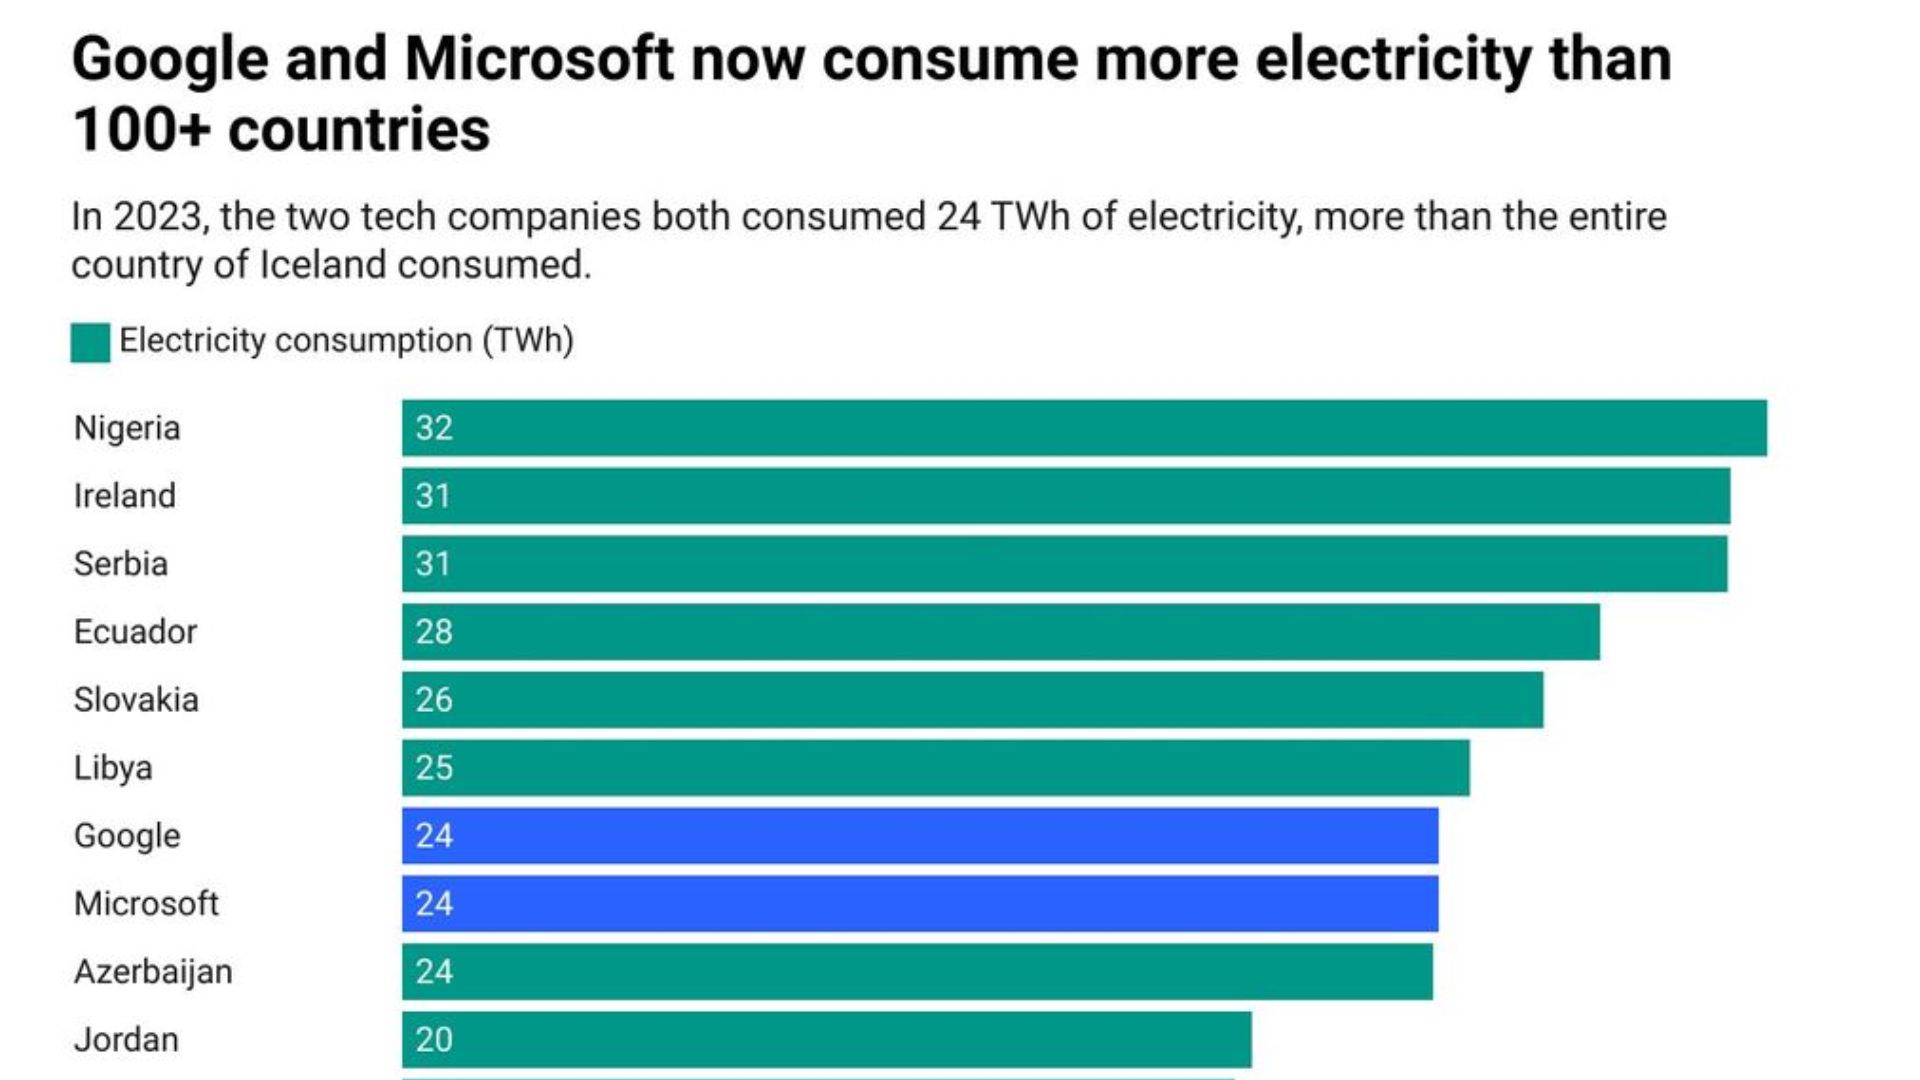 Google and Microsoft consume more electricity than 100+ countries